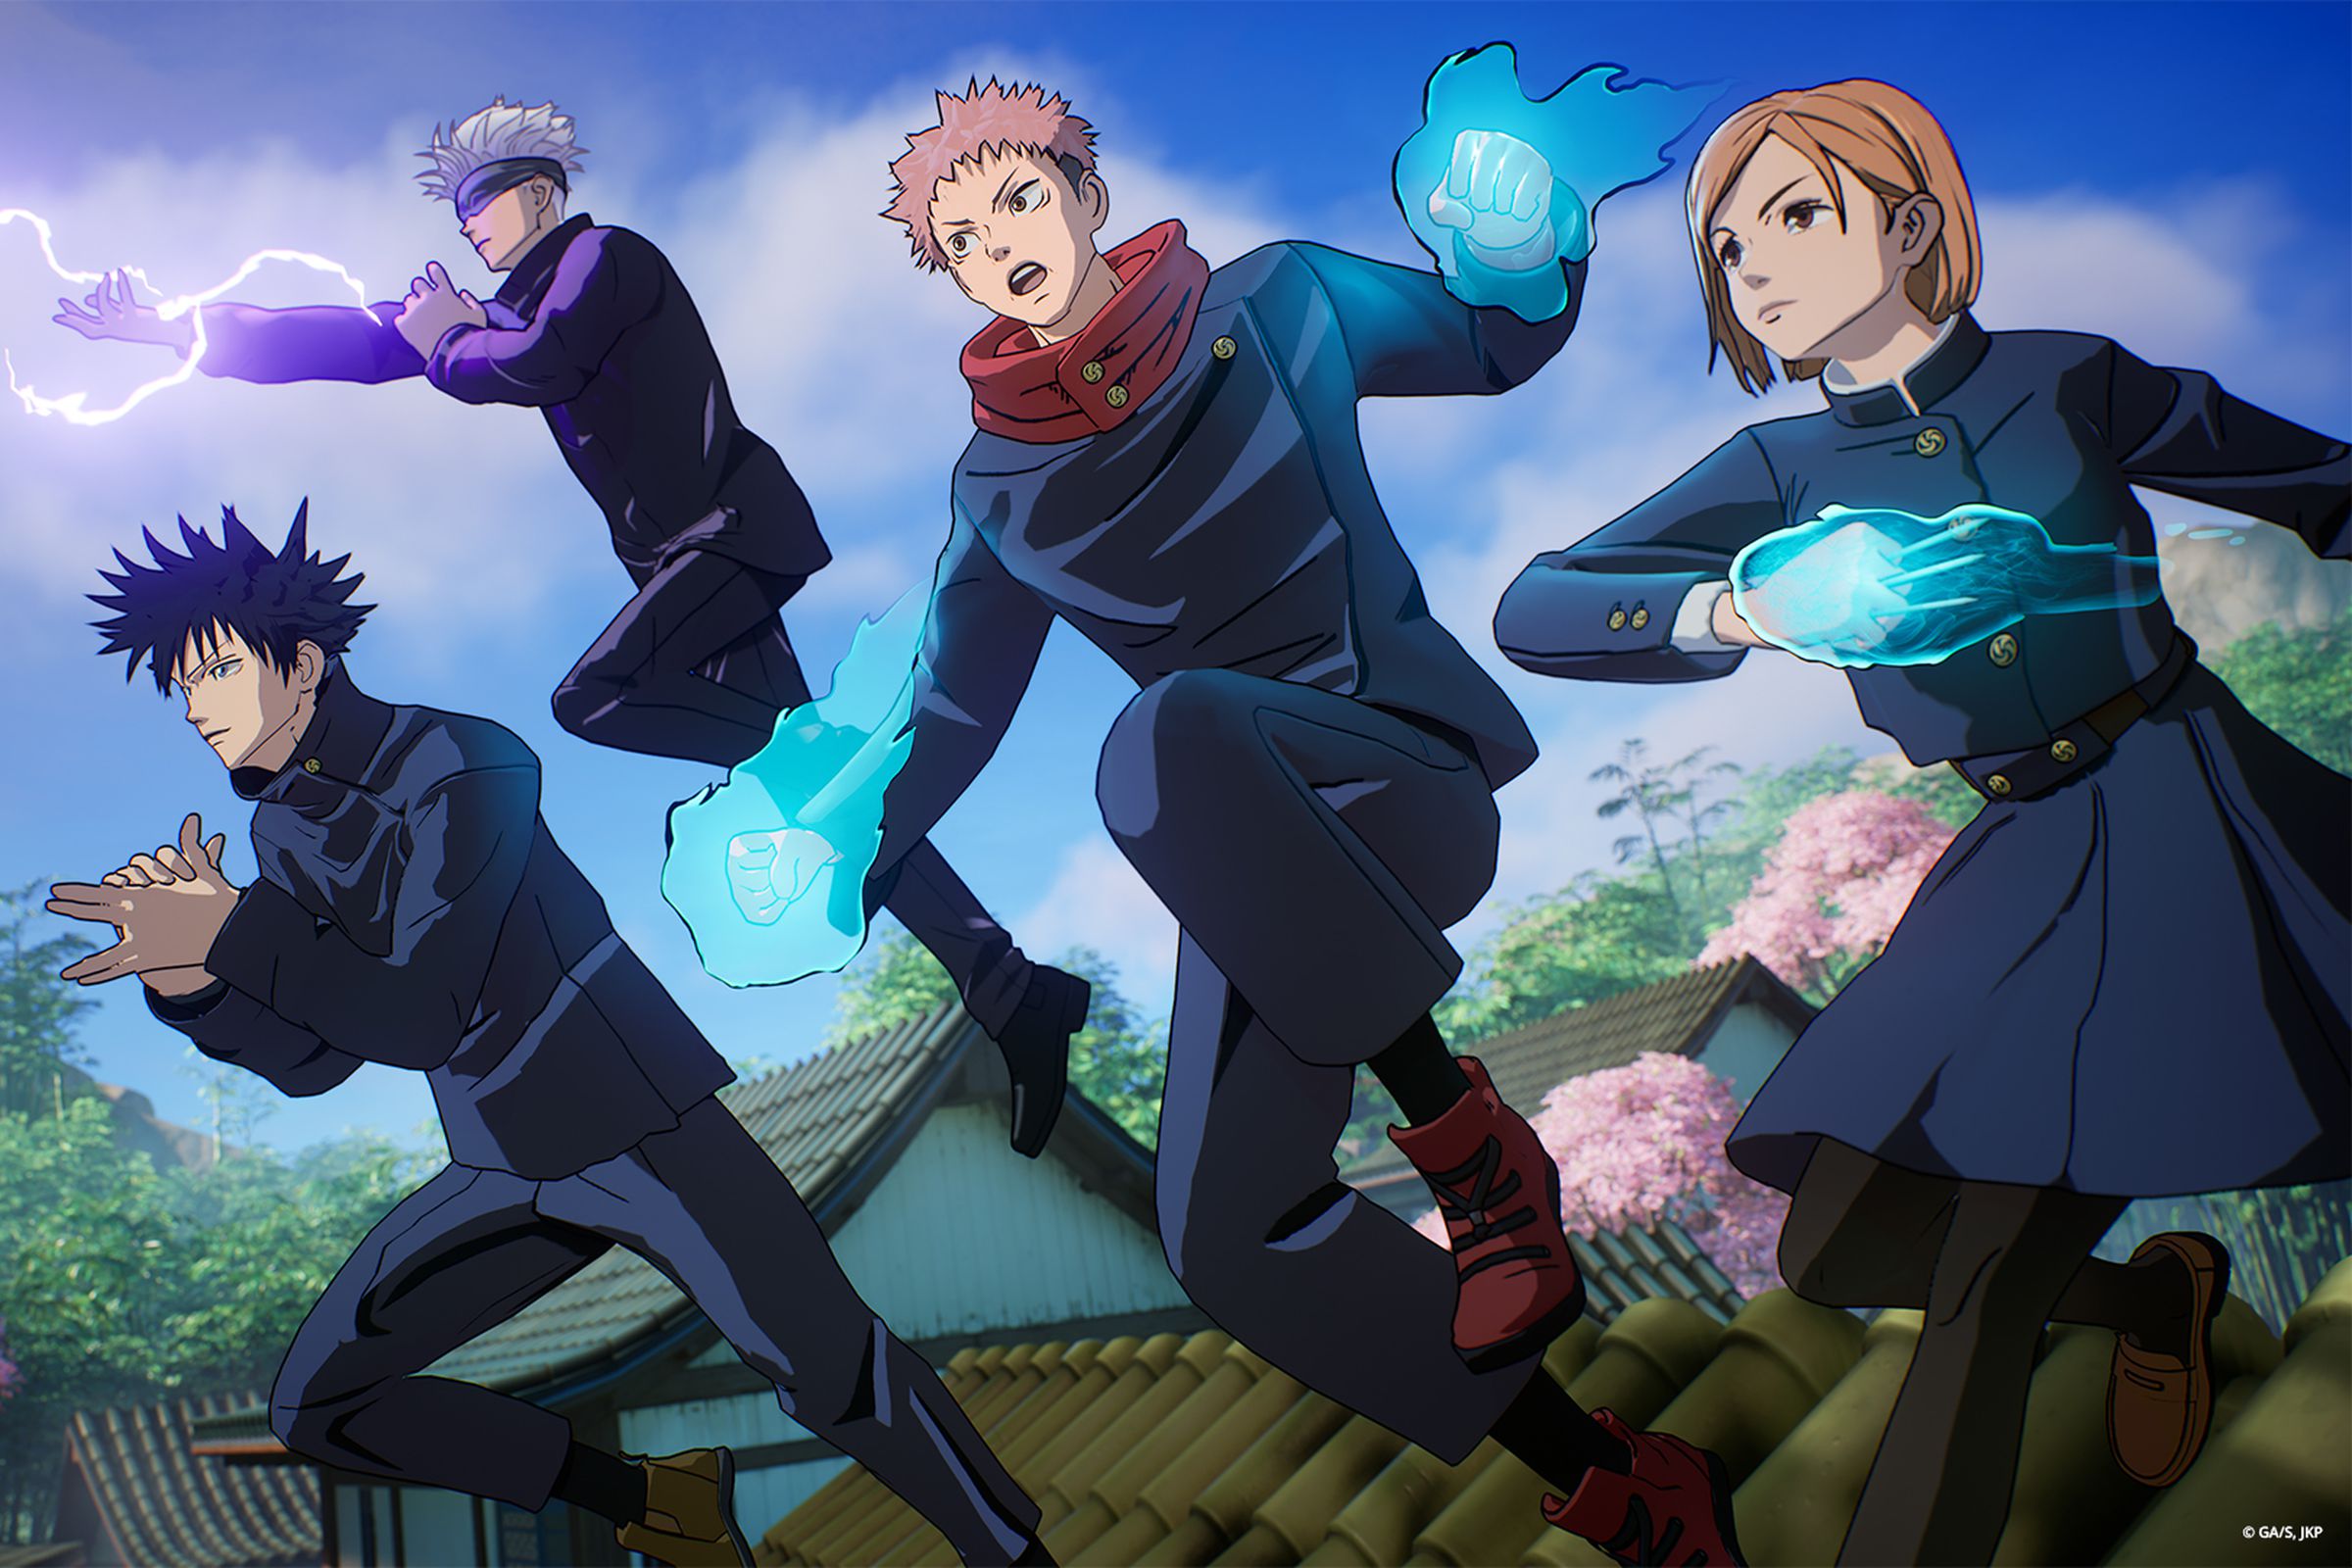 Promotional art for Fortnite’s collaboration with Jujutsu Kaisen.